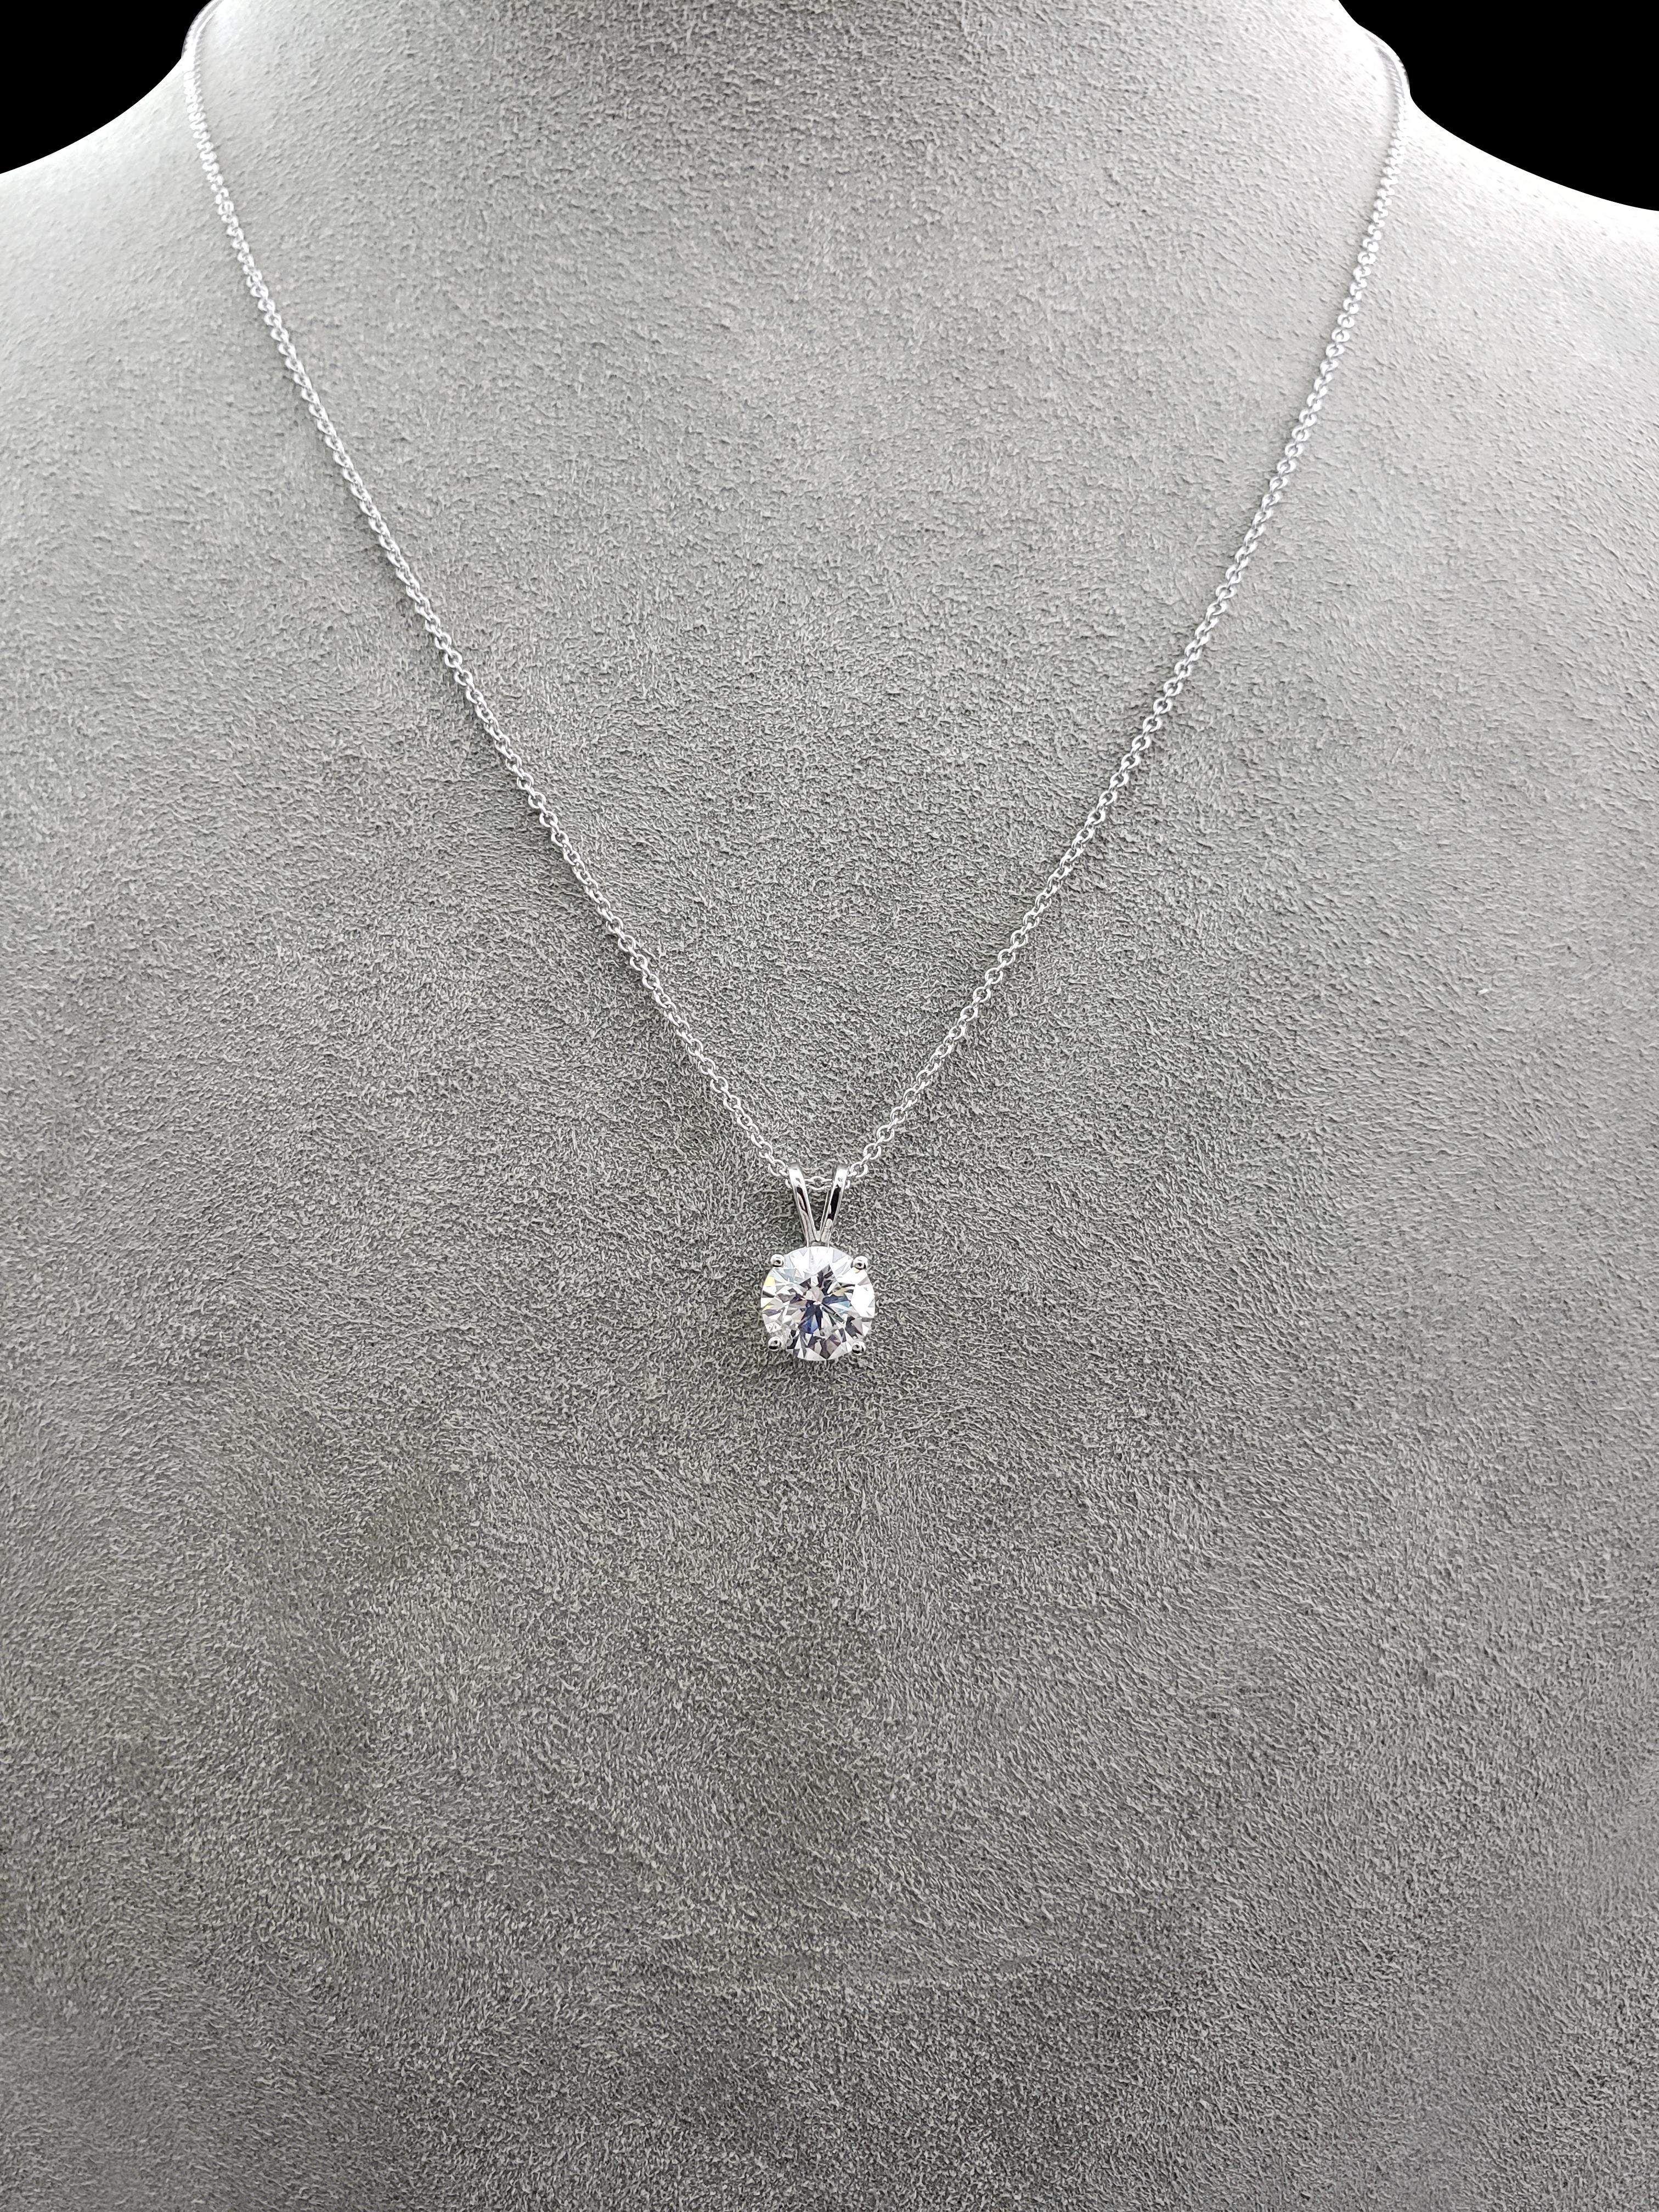 A simple and timeless piece of jewelry that carries a lot of sparkle. Features a 2.04 carat round brilliant diamond set in an elegant 14 karat white gold basket. Suspends on a V-shaped bale on an 18 inch white gold chain (adjustable upon